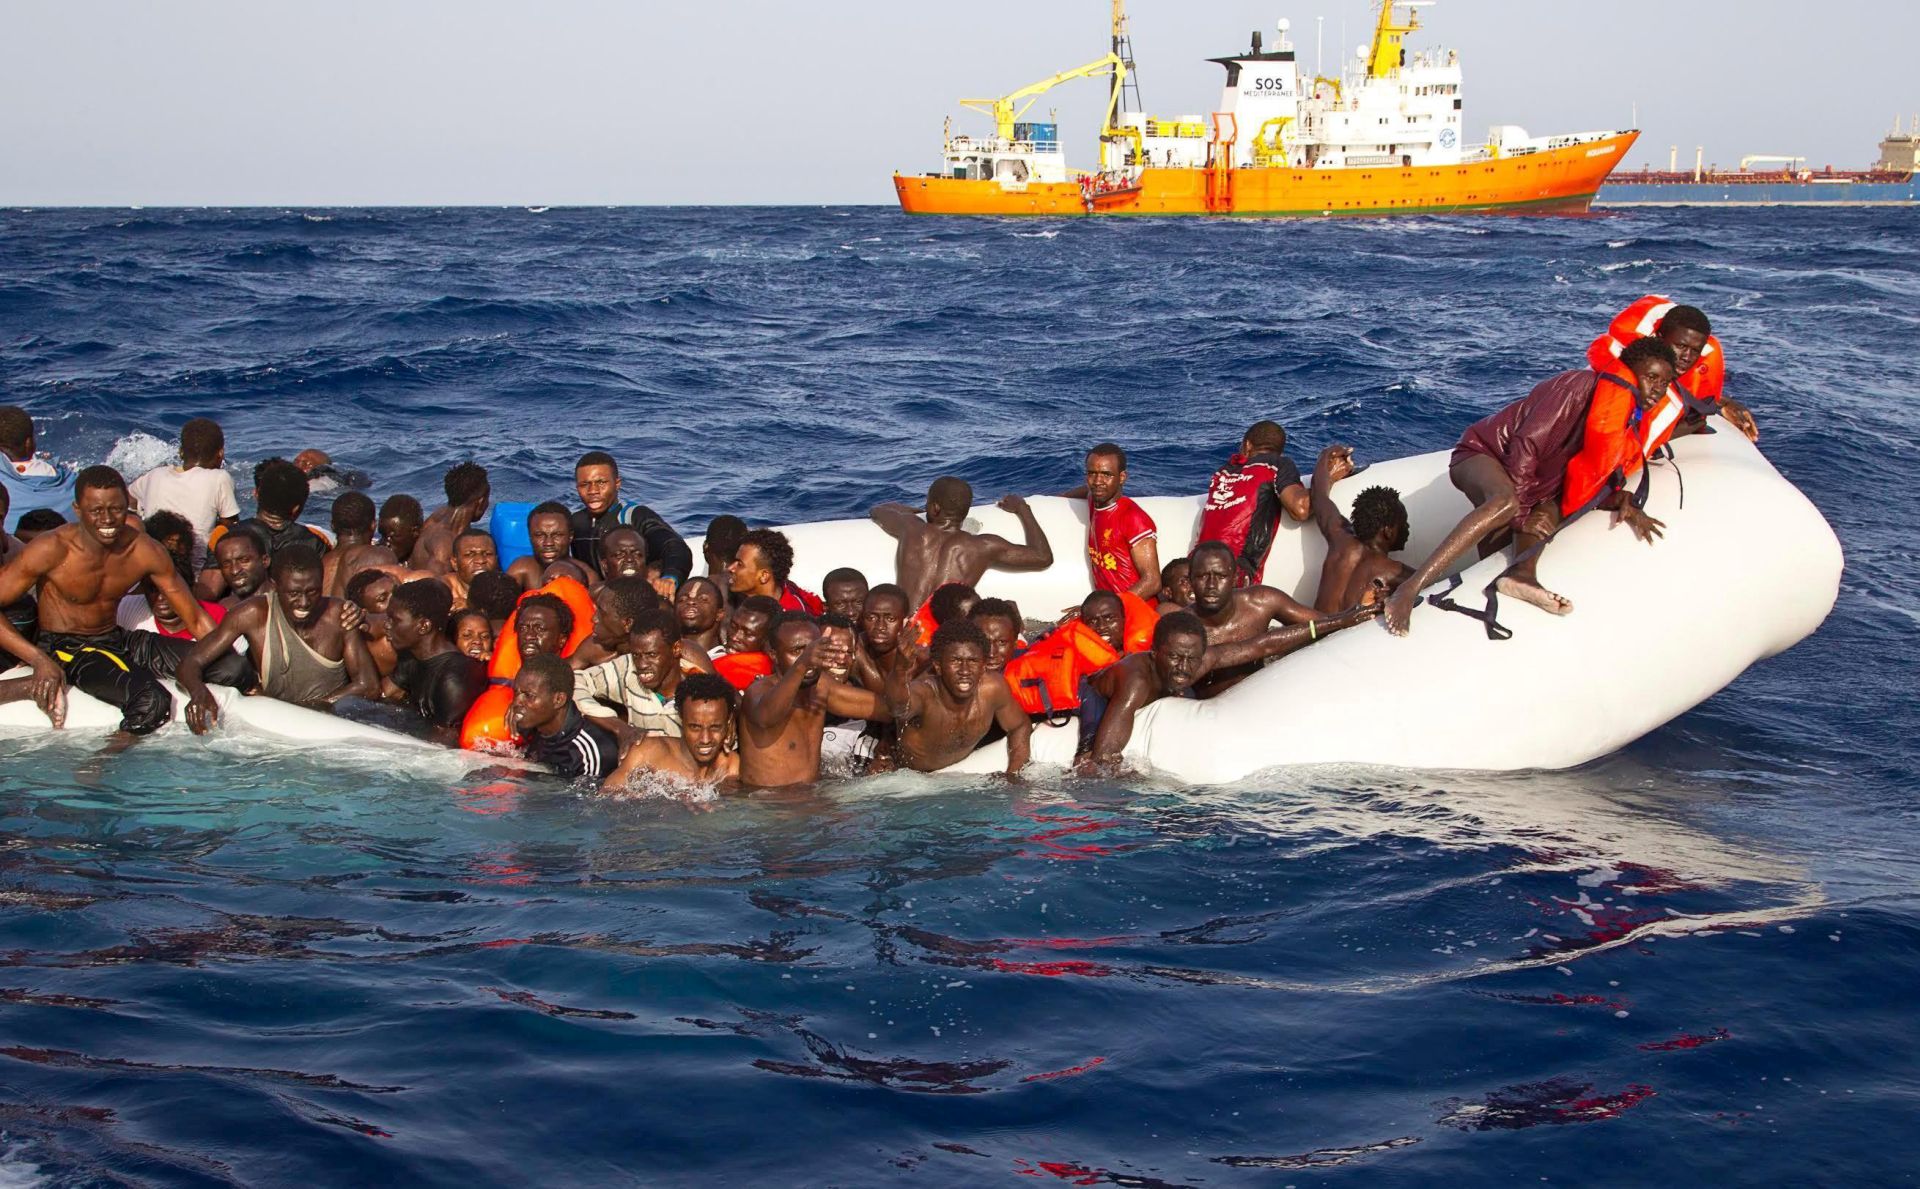 epa05265406 A handout photgraph made available by the Ong Sos Méditerranée showing migrants on a snking inflatable boat before being rescued by  the Aquarius ship of the humanitarian group SOS Mediterranee, and taken to  Lampesusa, Italy, 18 April 2016. Six bodies were recovered and 108 migrants were rescued from a semi-submerged rubber dinghy as boat arrivals accelerate amid calm seas. A private rescue ship, the Aquarius, run by humanitarian group SOS Mediterranee found the bodies on the rubber dingyon 17 April 2016.  EPA/ONG SOS MEDITERRANEE / HANDOUT  HANDOUT EDITORIAL USE ONLY/NO SALES